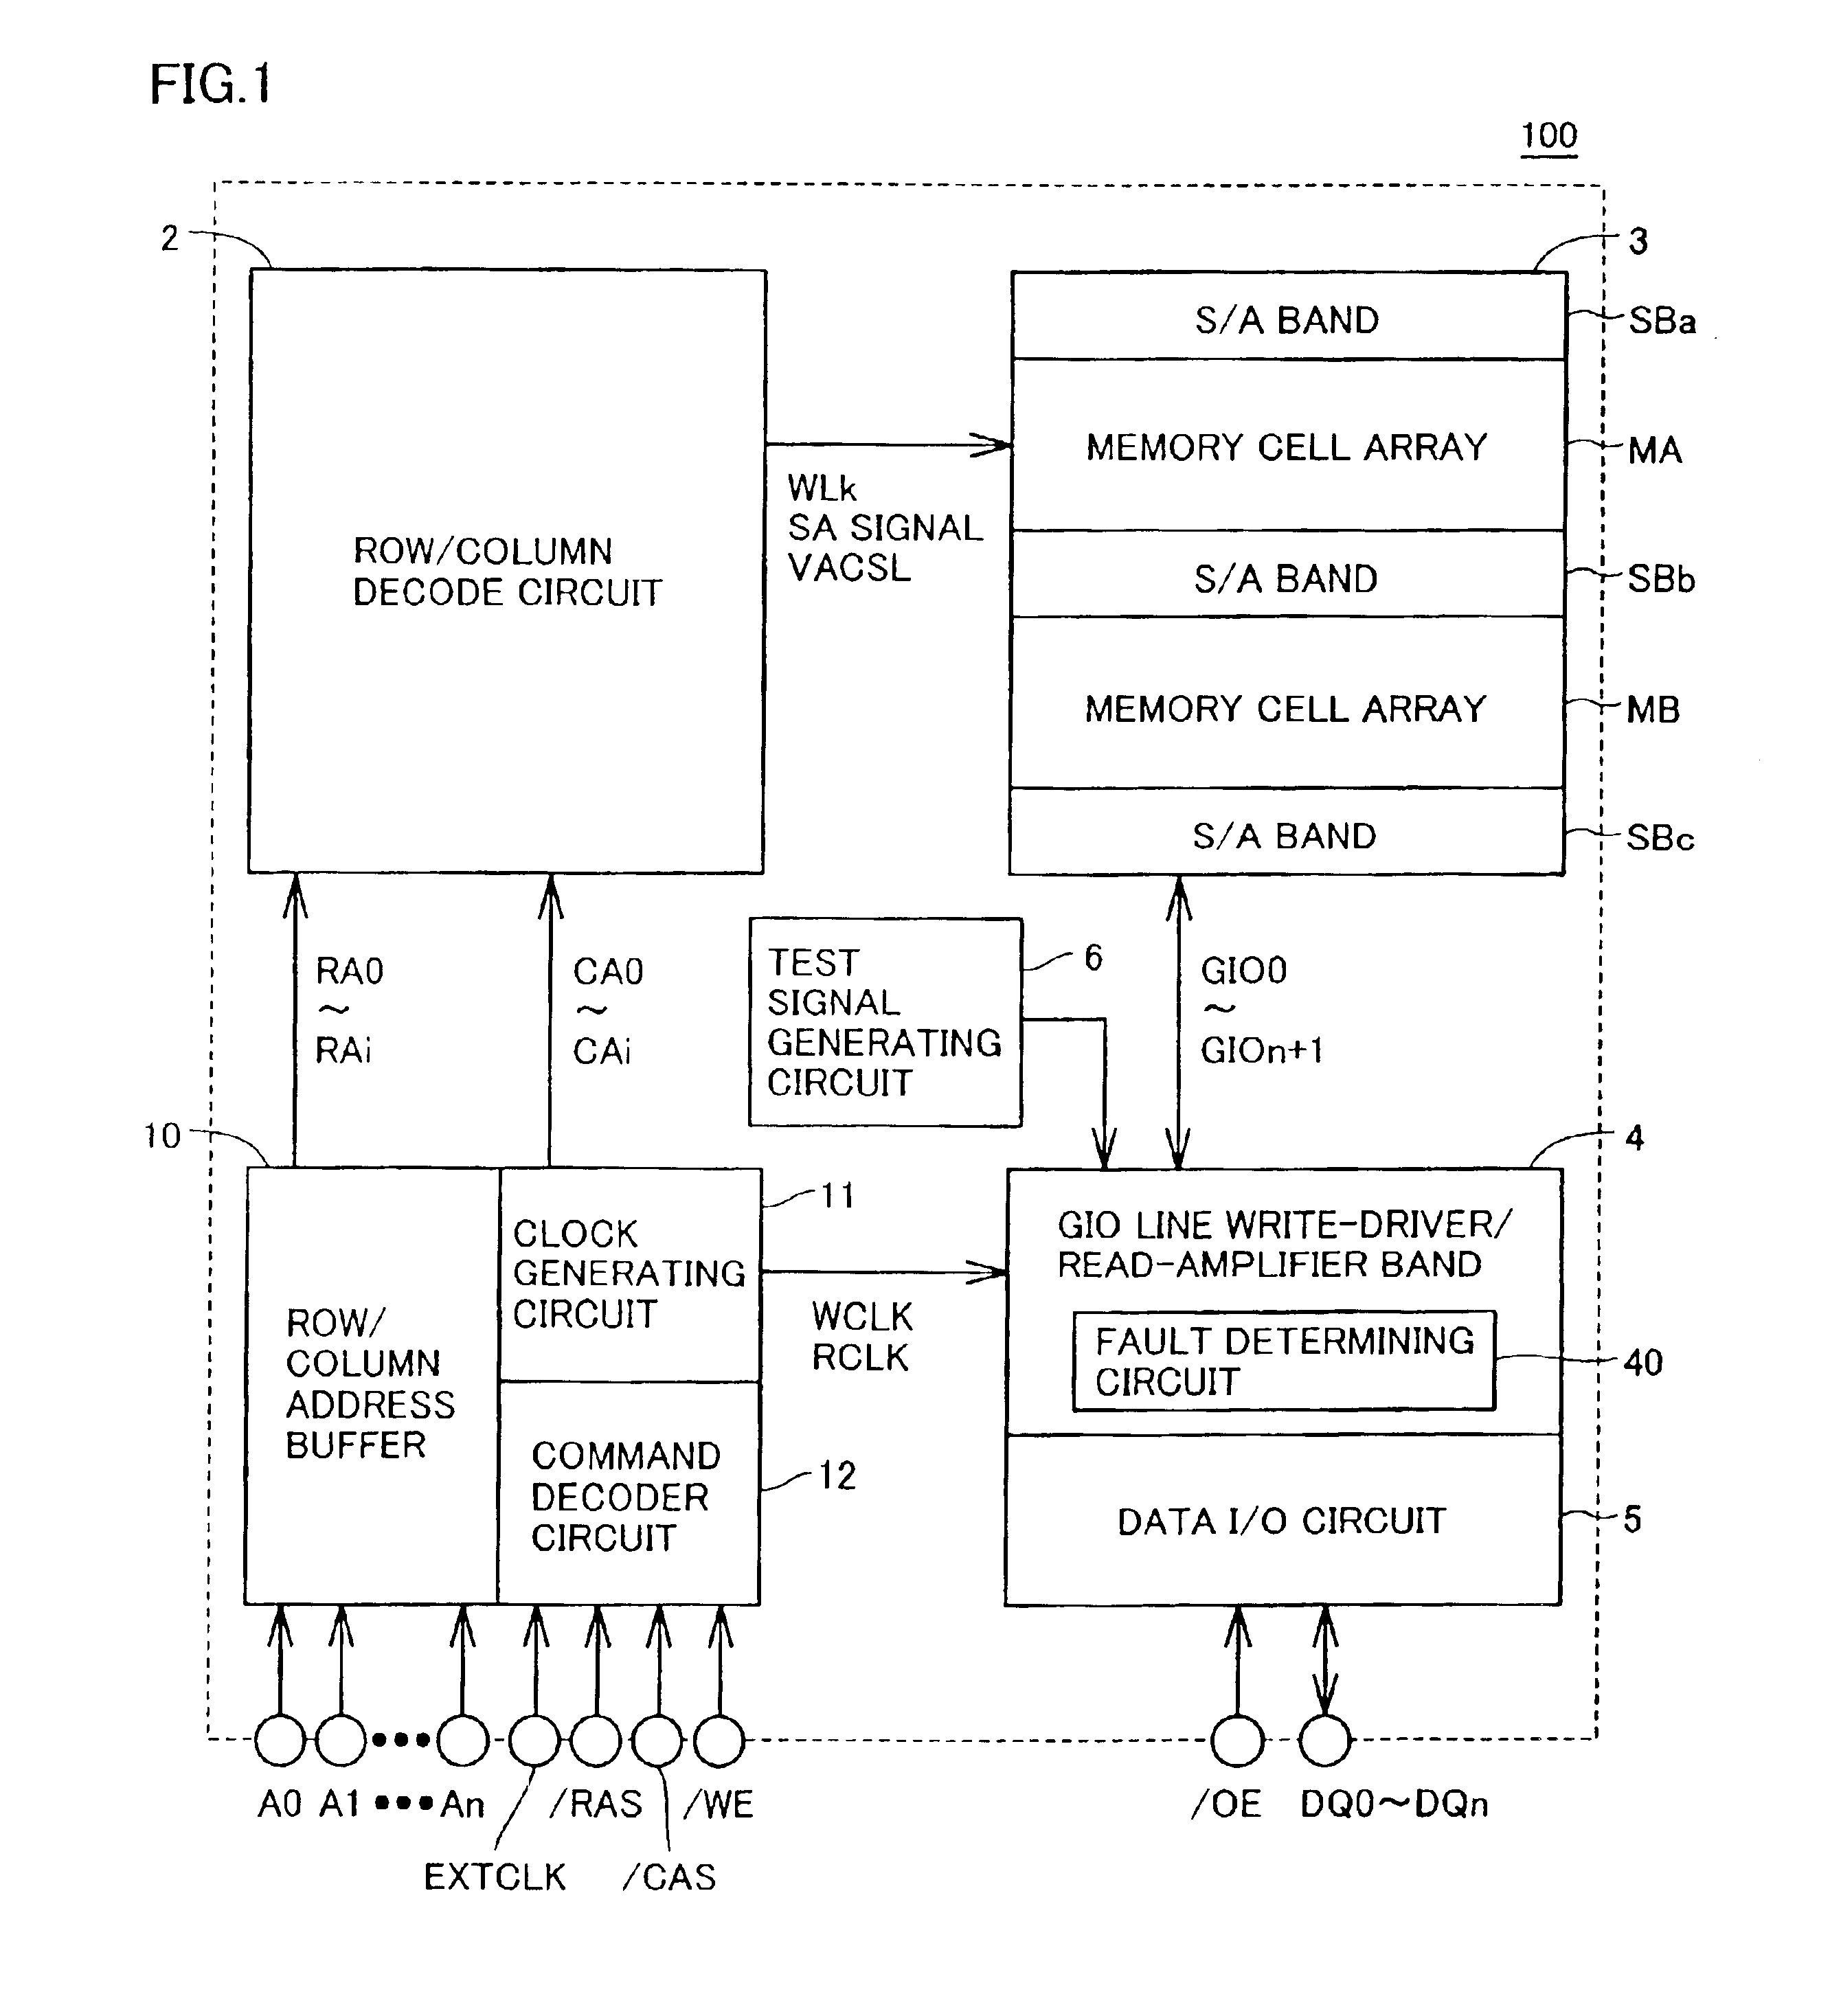 Semiconductor memory device having a plurality of signal lines for writing and reading data